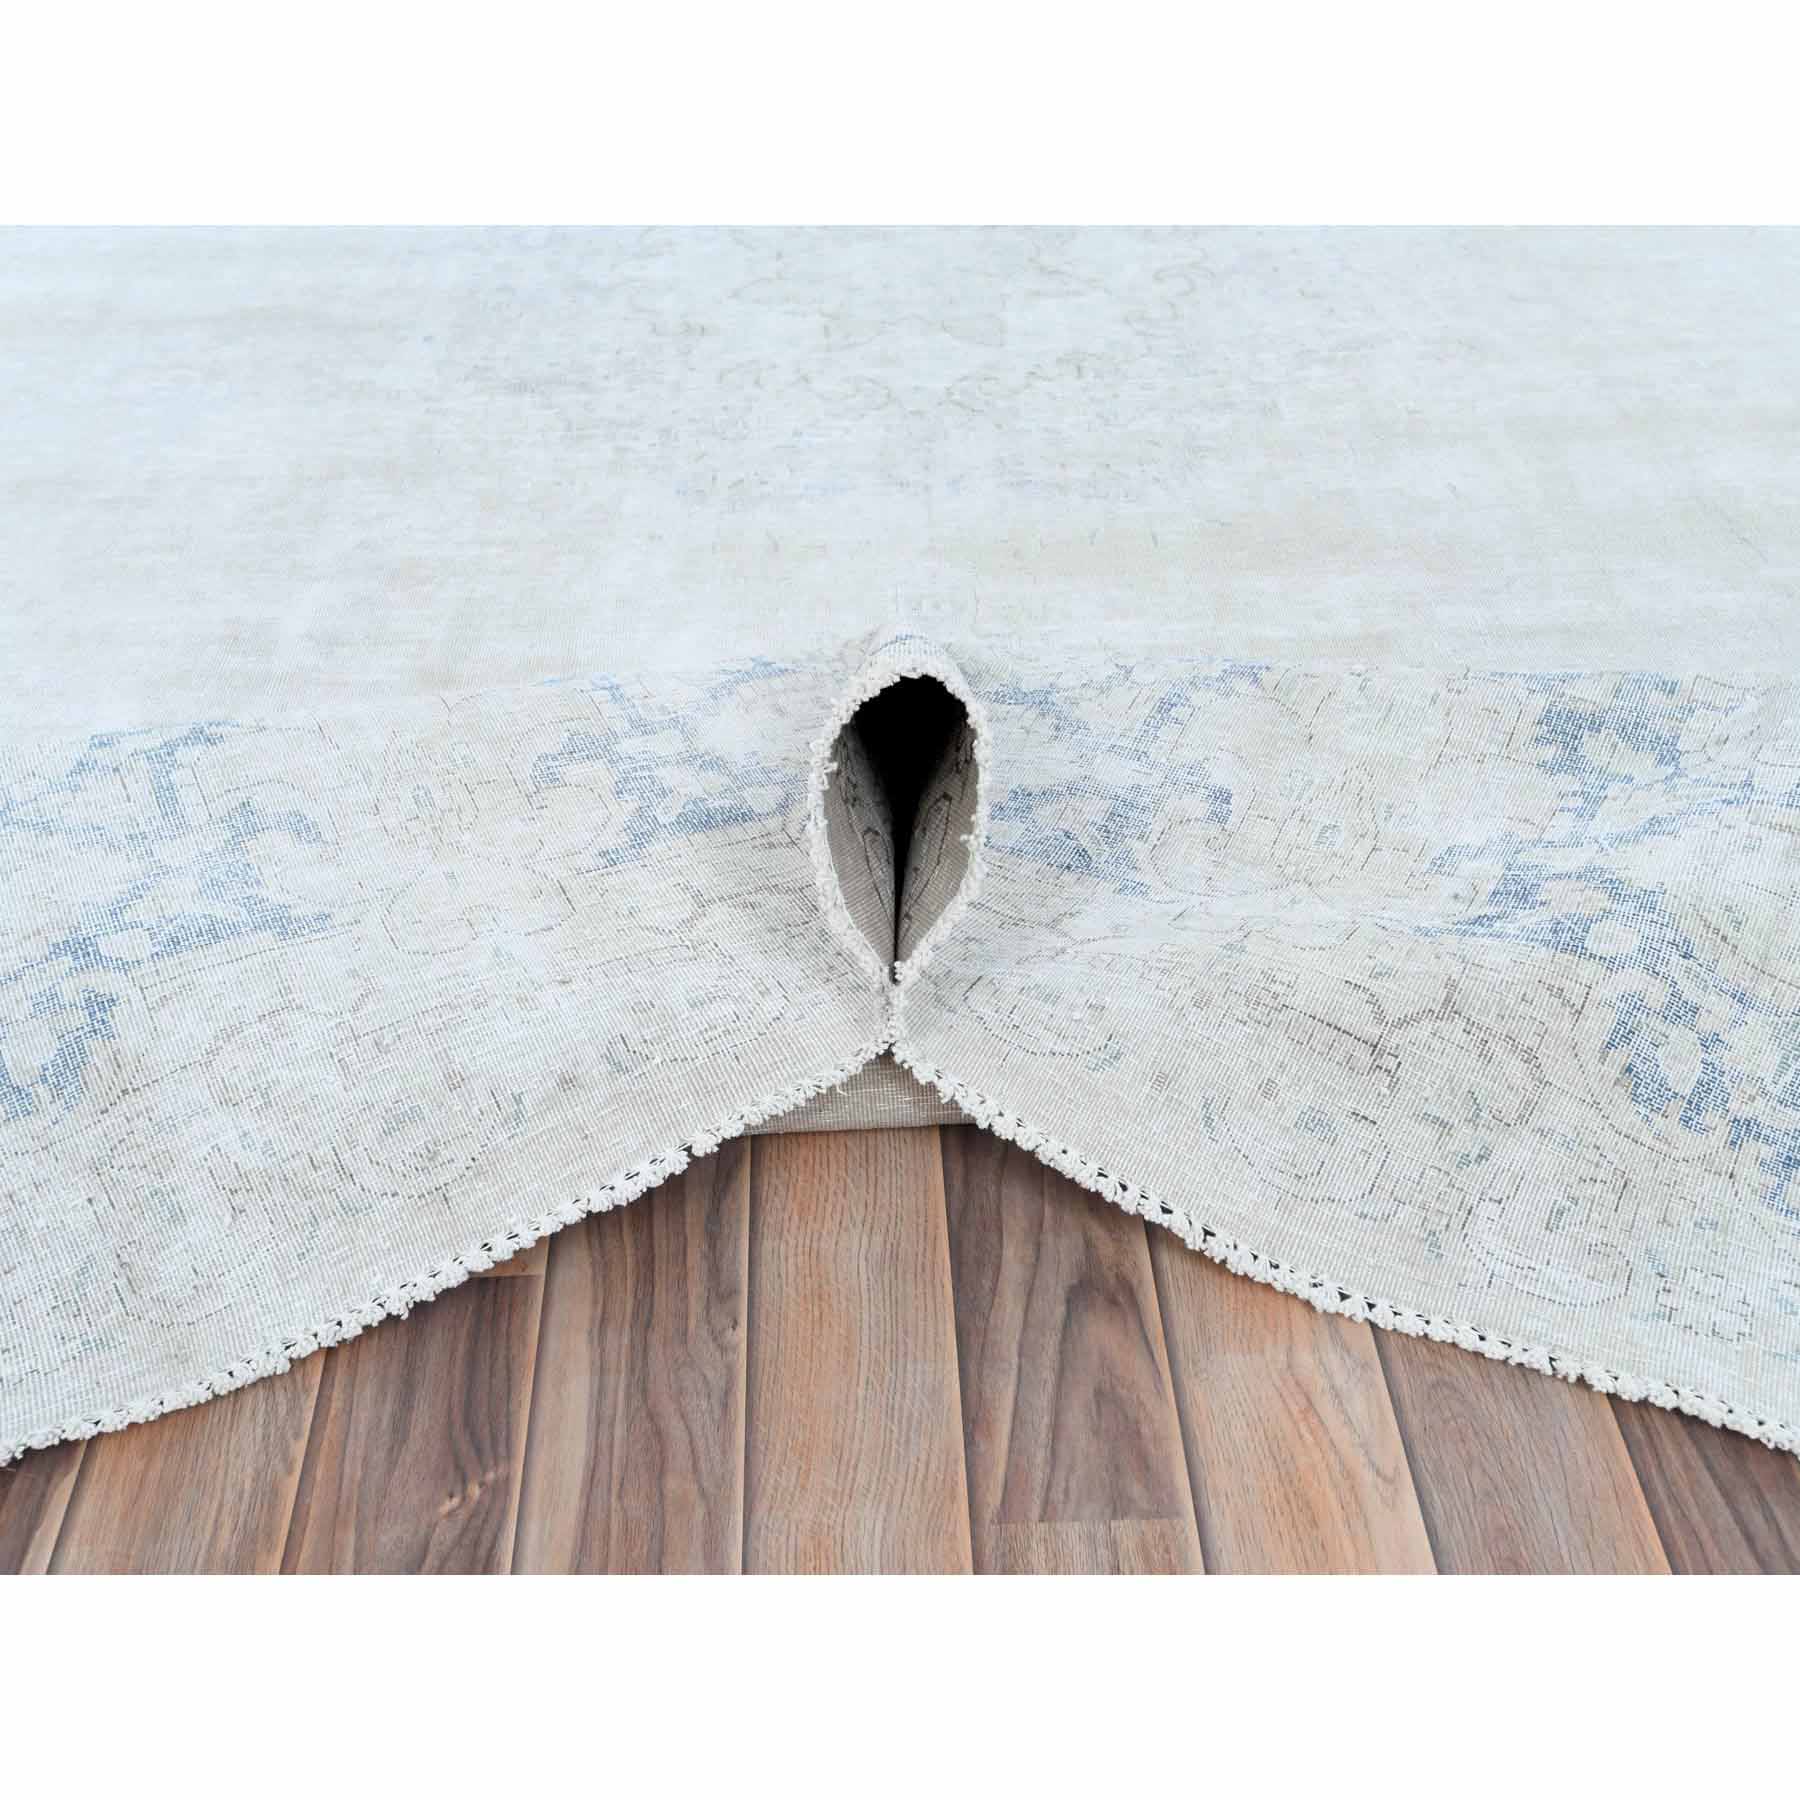 Overdyed-Vintage-Hand-Knotted-Rug-408125